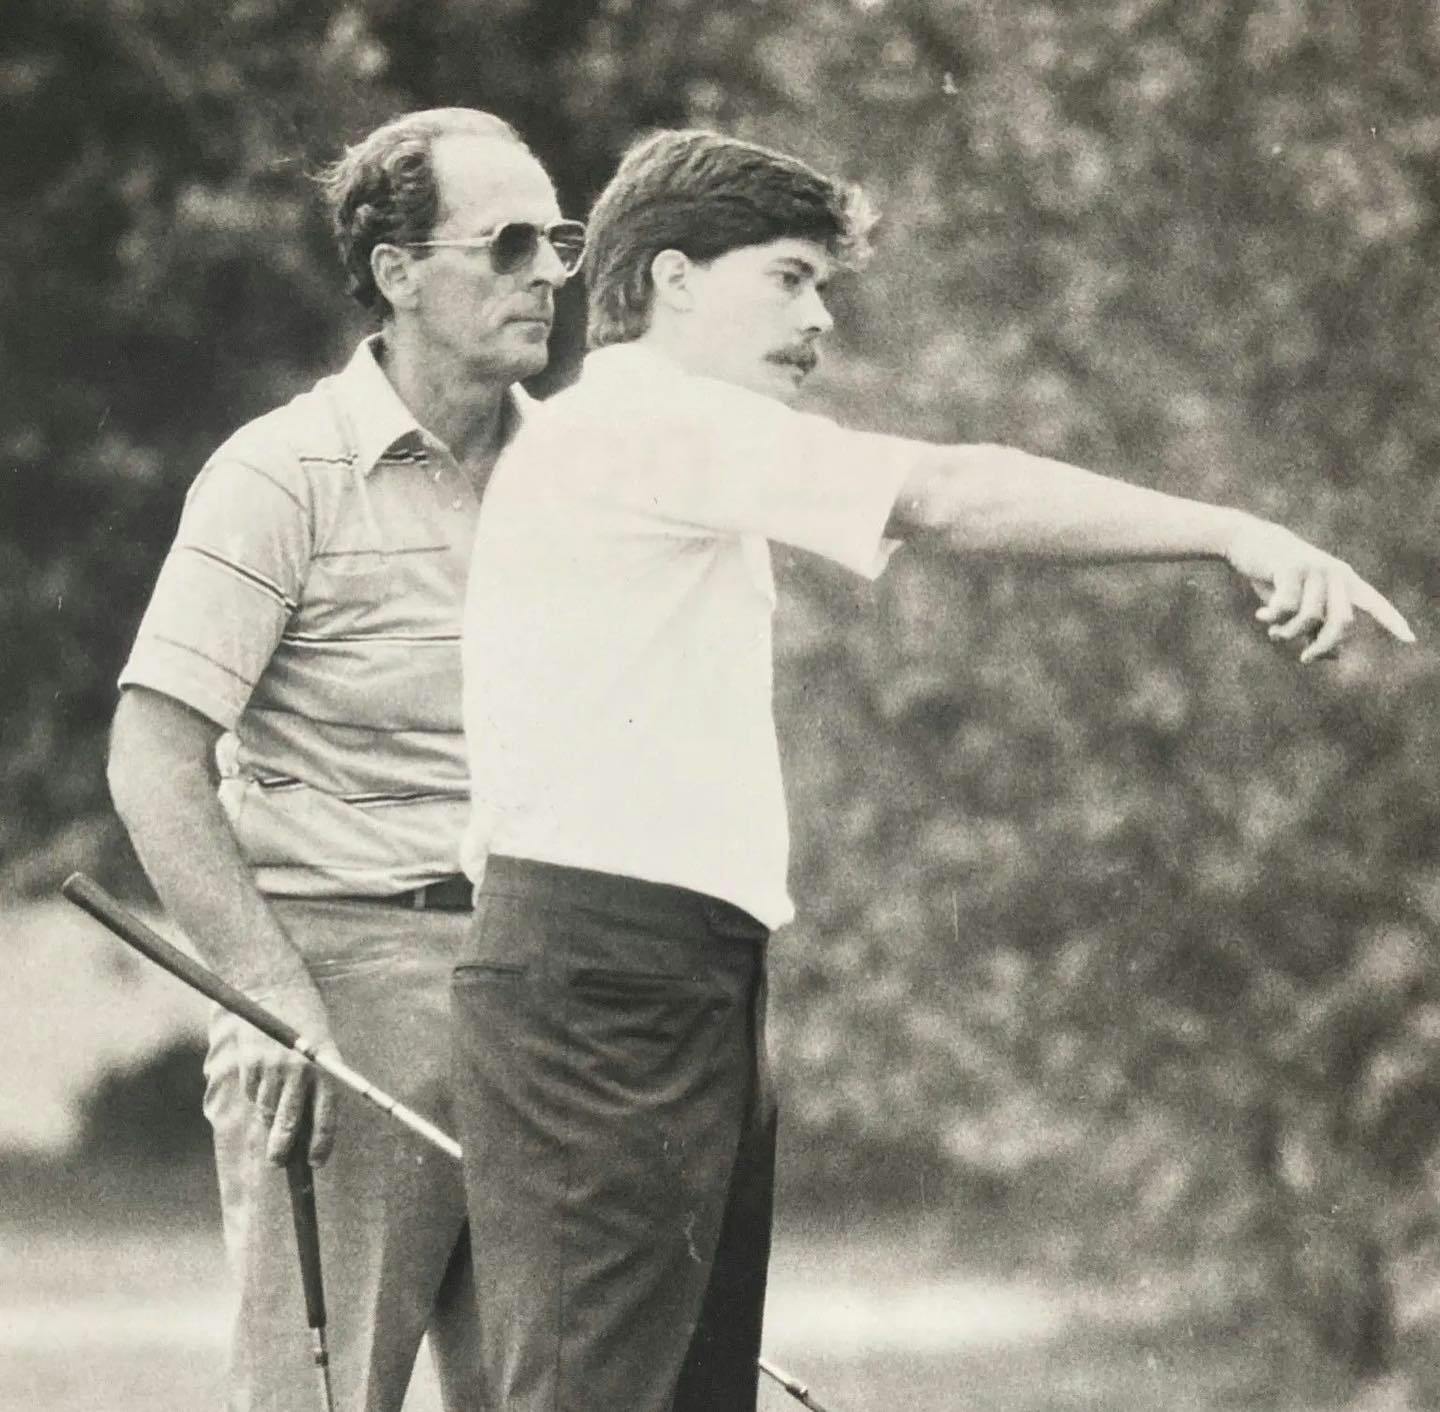 Moe Norman and George Clifton playing the 1982 Ontario Jr. Pro / Sr. Pro. We hosted the event from 1982-1985. 

The second picture is Greg and George Louth playing in the event!